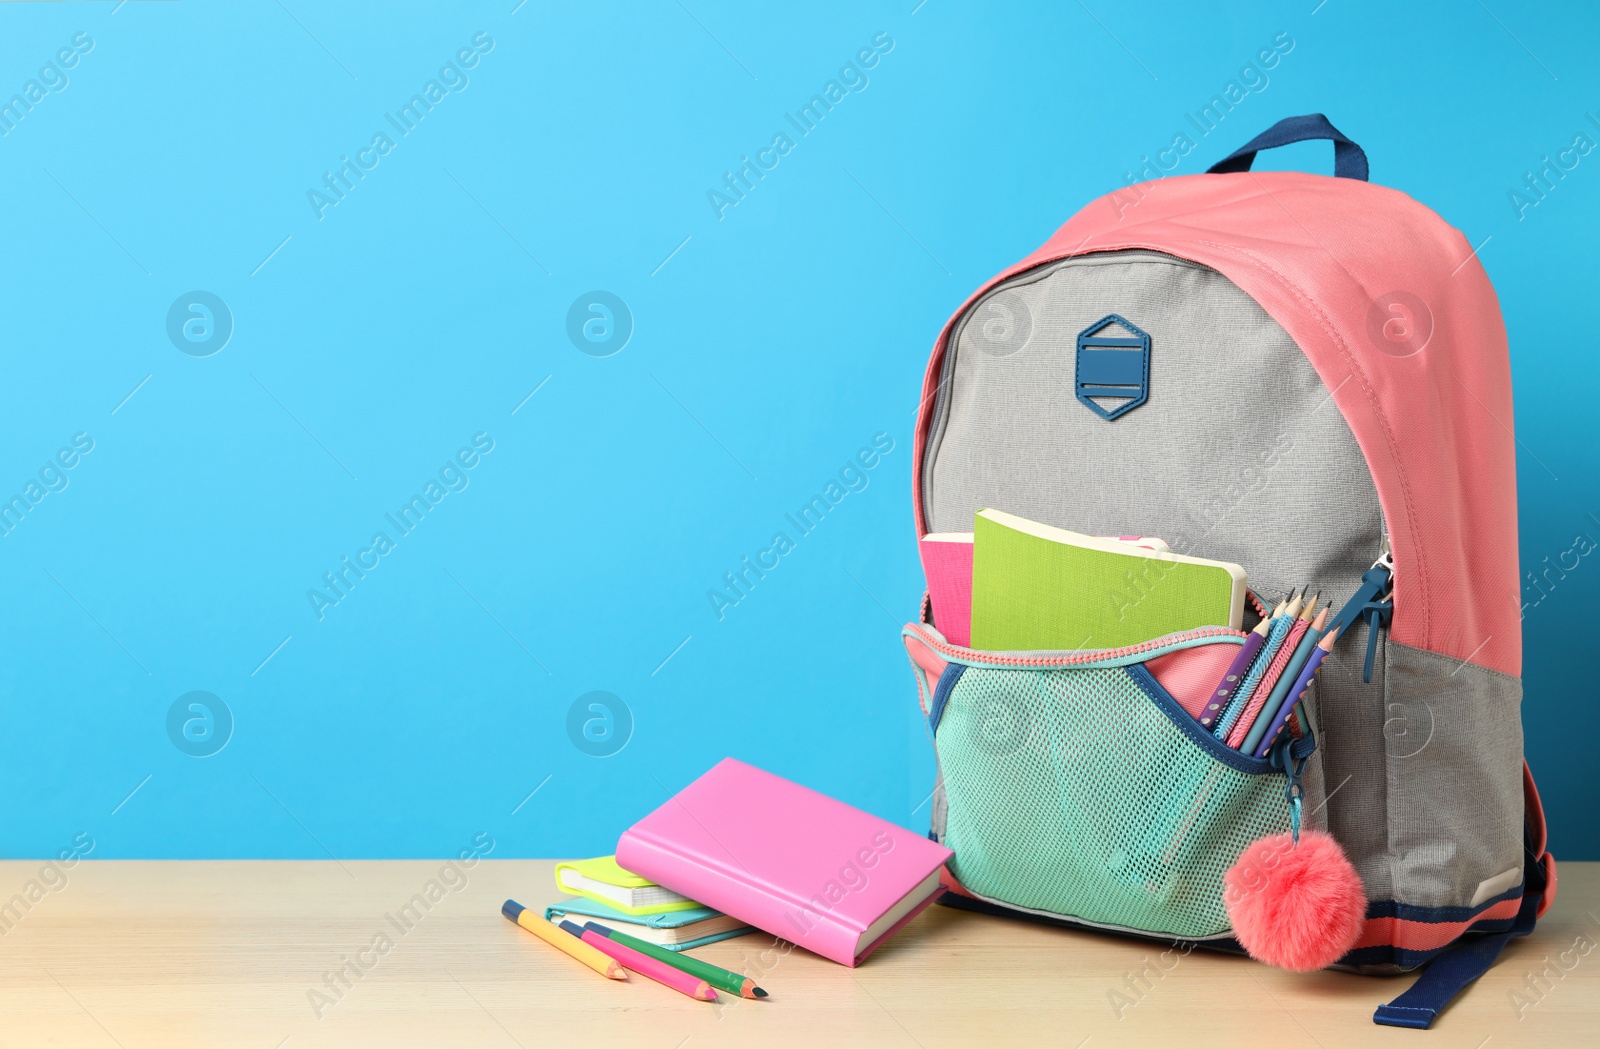 Photo of Stylish backpack and different school stationery on wooden table against light blue background, space for text. Back to school